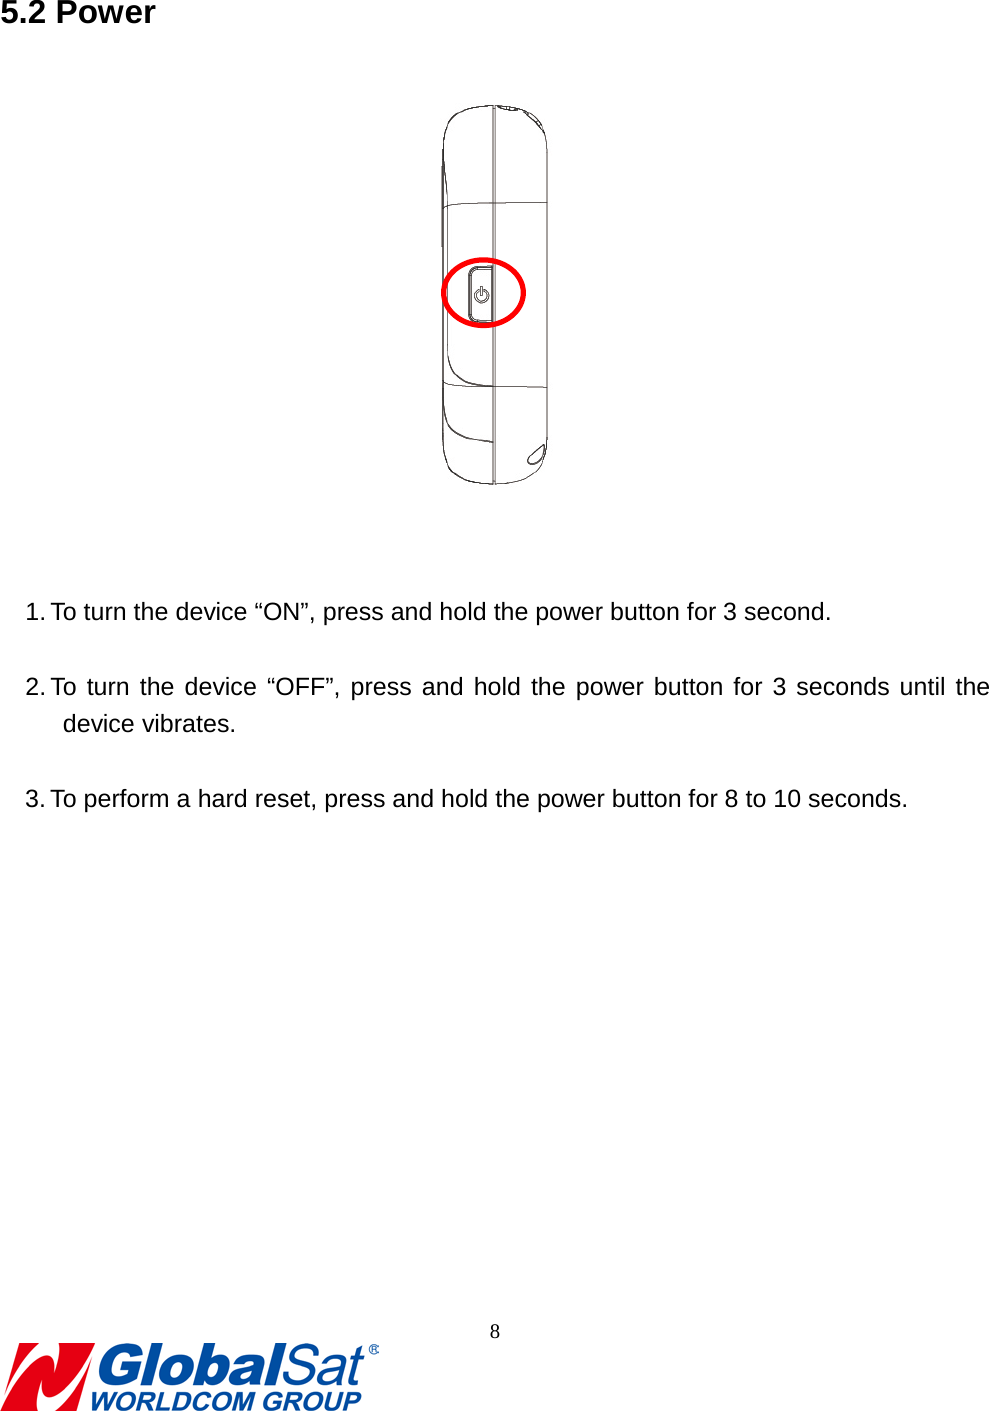                                                                                5.2 Power    1. To turn the device “ON”, press and hold the power button for 3 second.  2. To turn the device “OFF”, press and hold the power button for 3 seconds until the device vibrates.  3. To perform a hard reset, press and hold the power button for 8 to 10 seconds. 8  